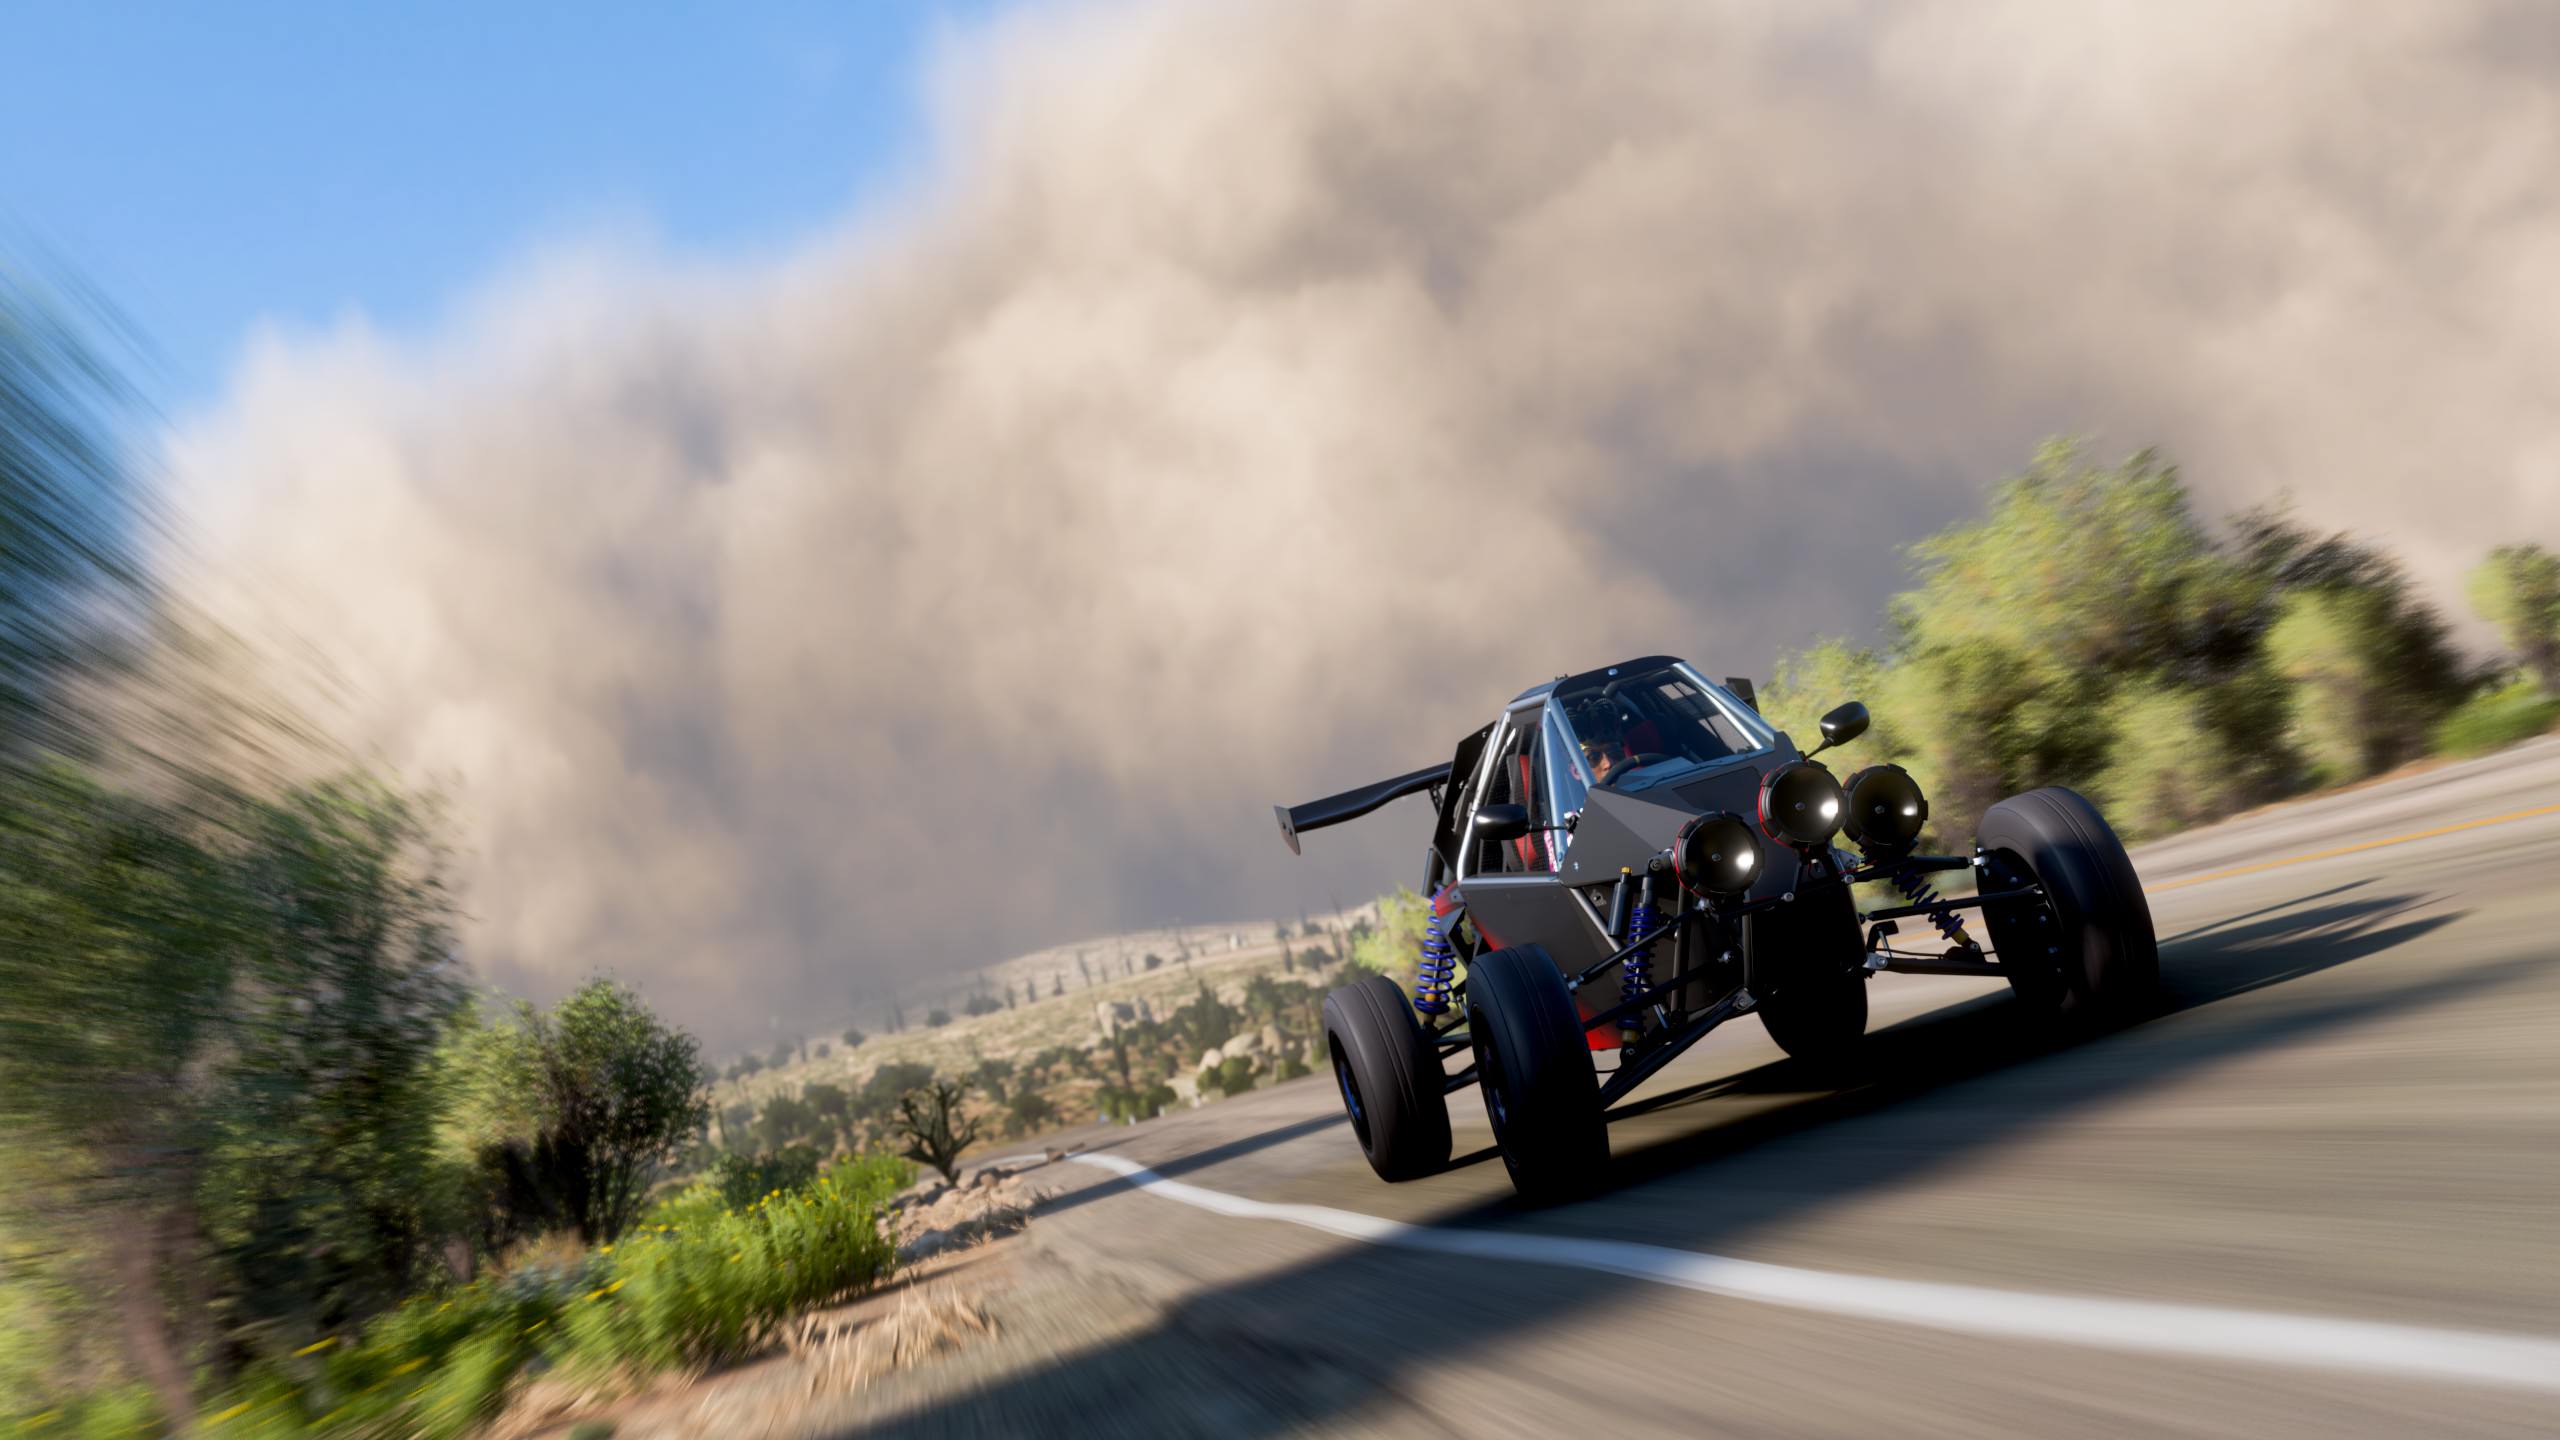 COTW 60: Out of the dust storm